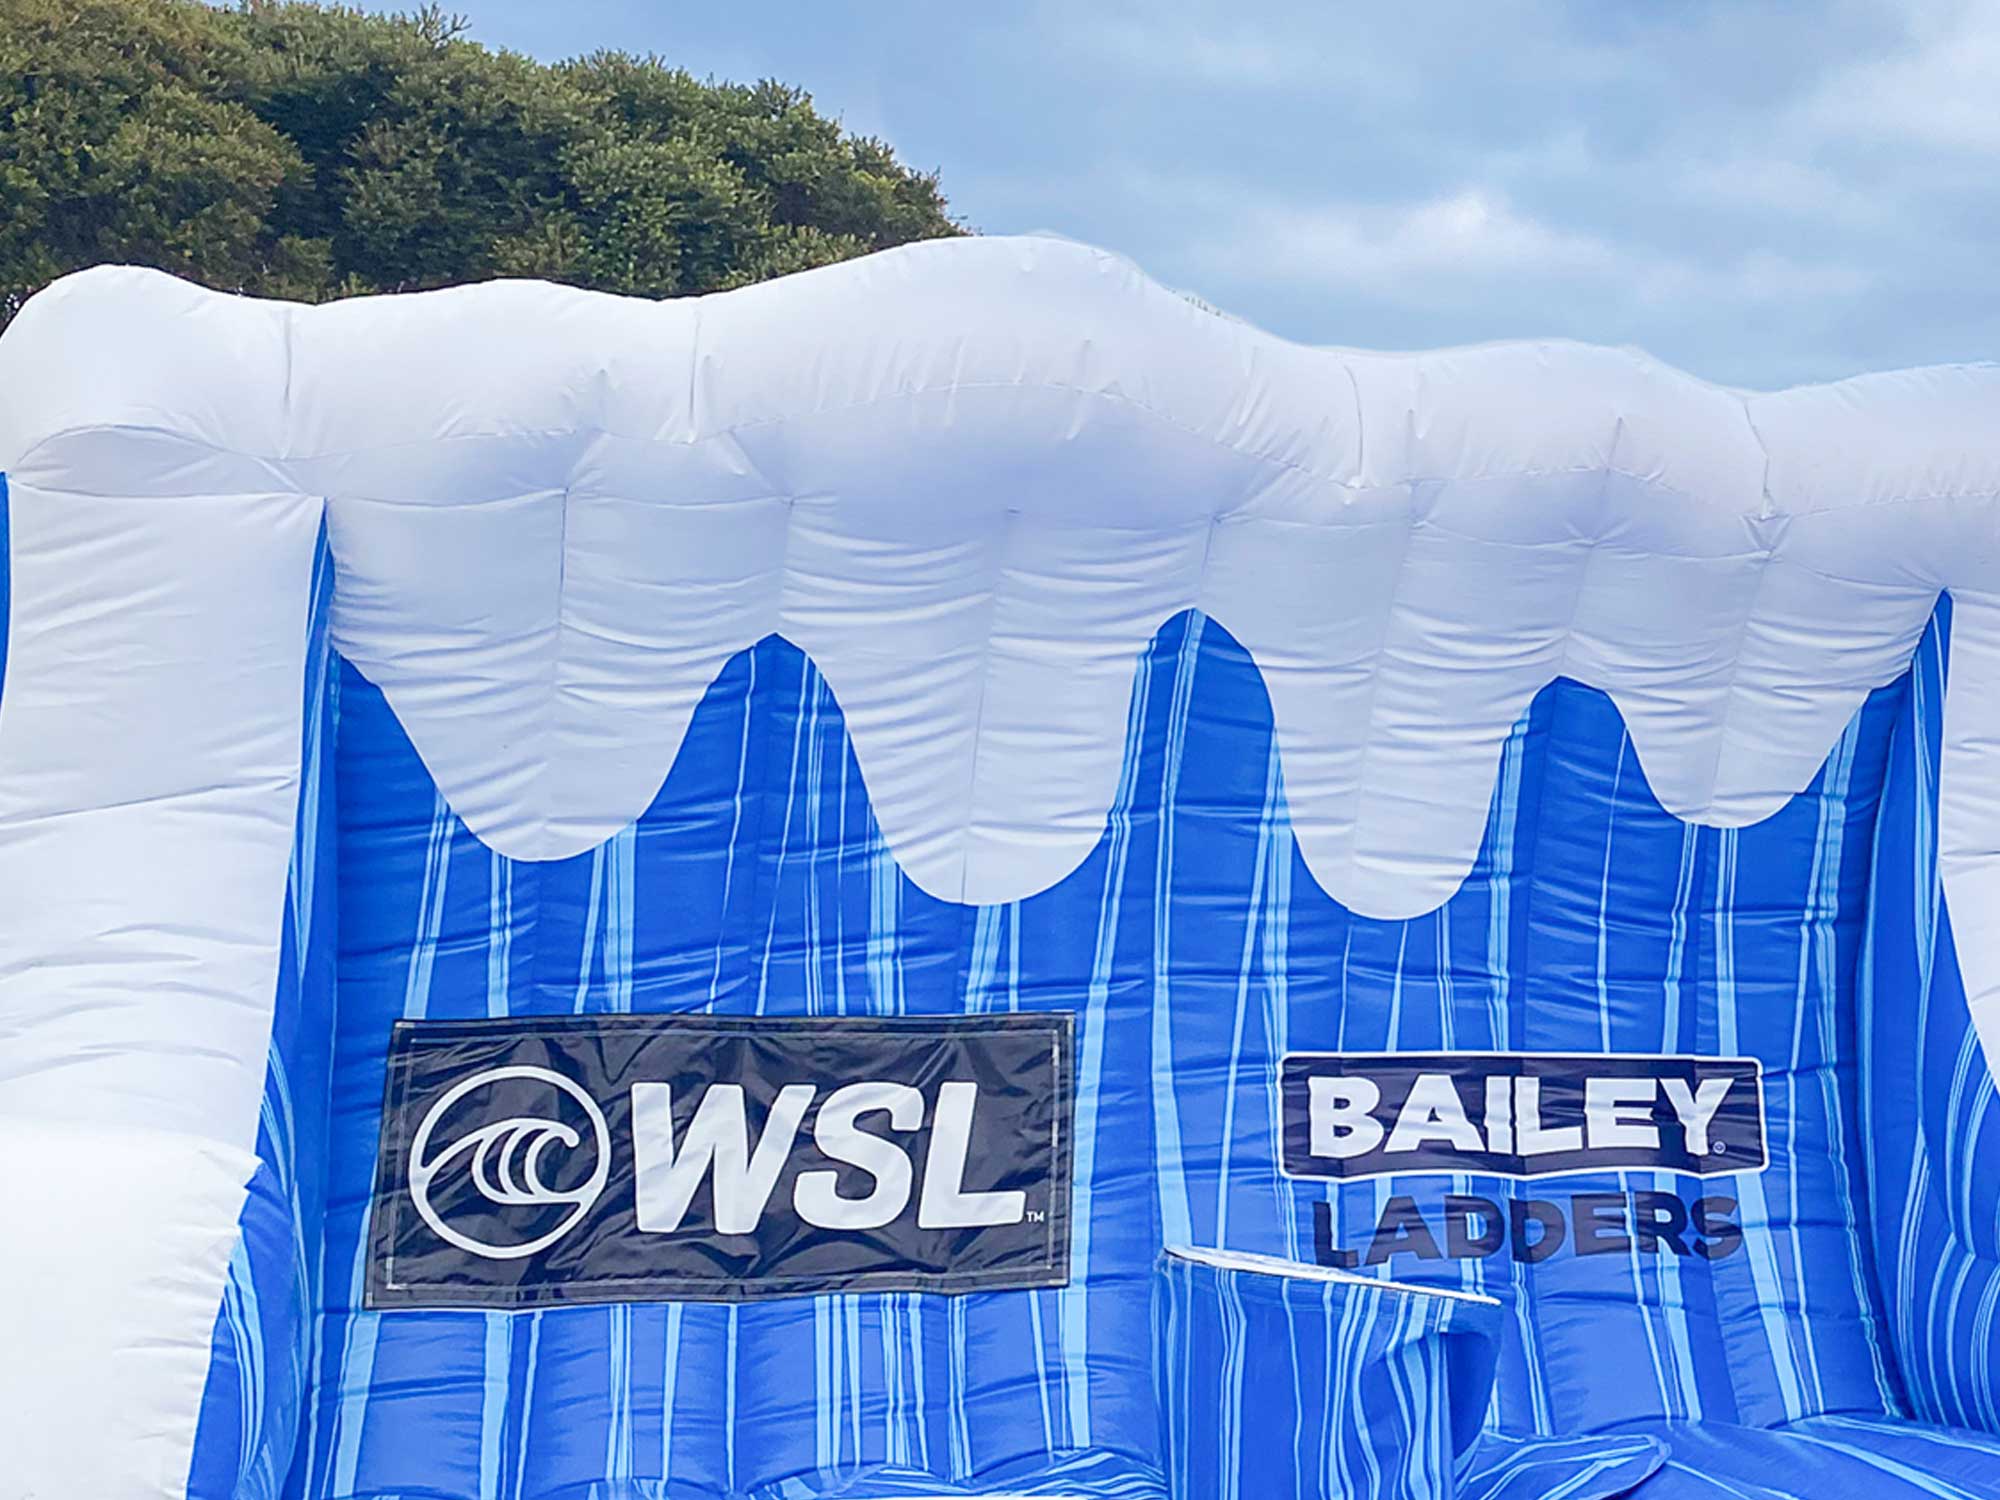 Extra prominent branding was added to the inflatable to create a strong brand identity, allowing attendees to immediately associate Bailey Ladders with the event and the activation.